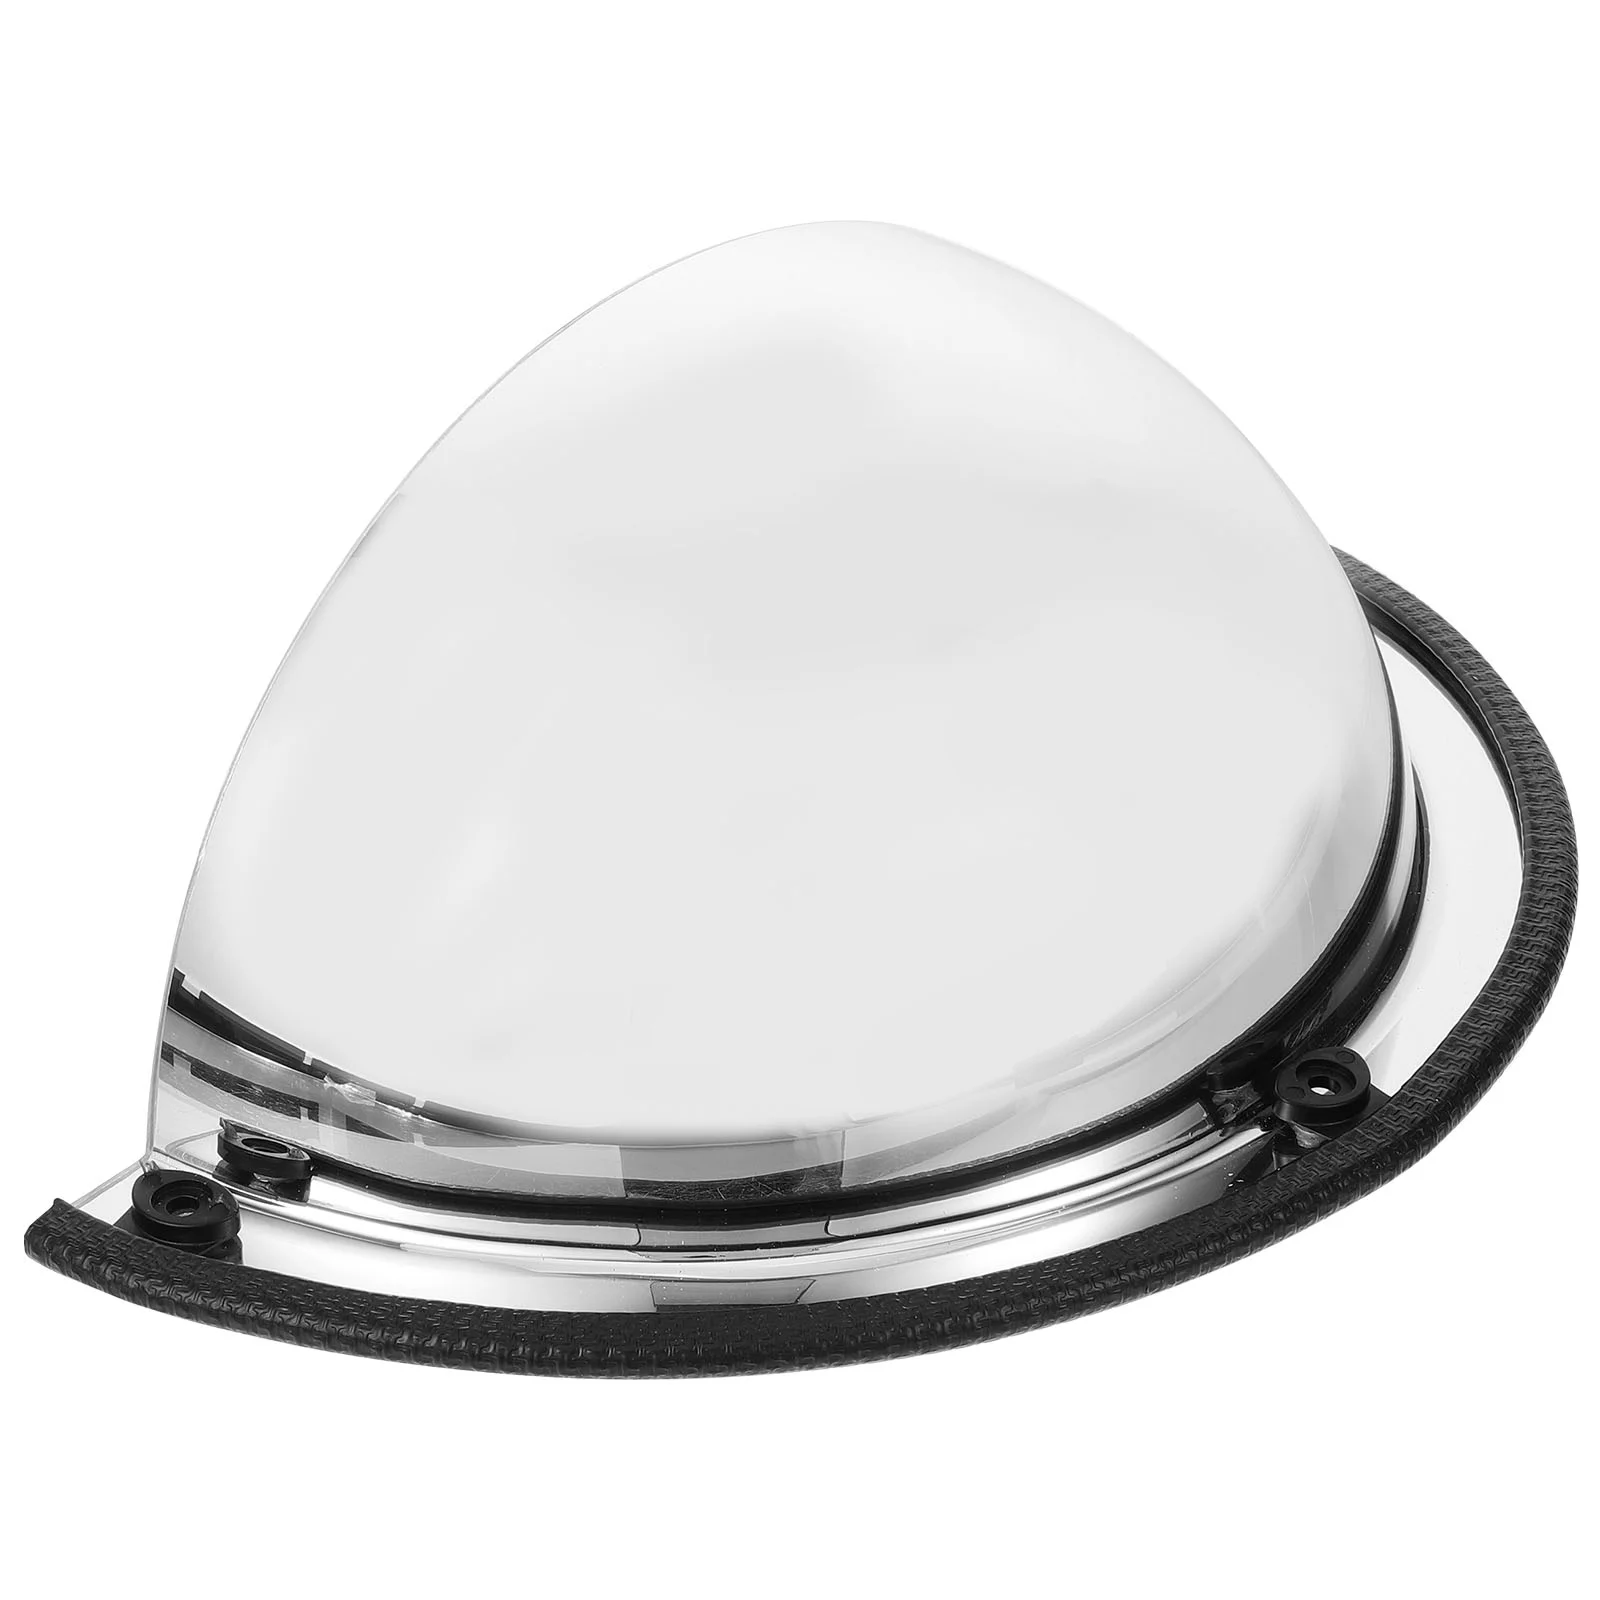 

Mirror Outdoor Convex Corner Bubble for Wall Parking Safety Garage Assist Acrylic Traffic Wide-angle Lens Road Mirrors